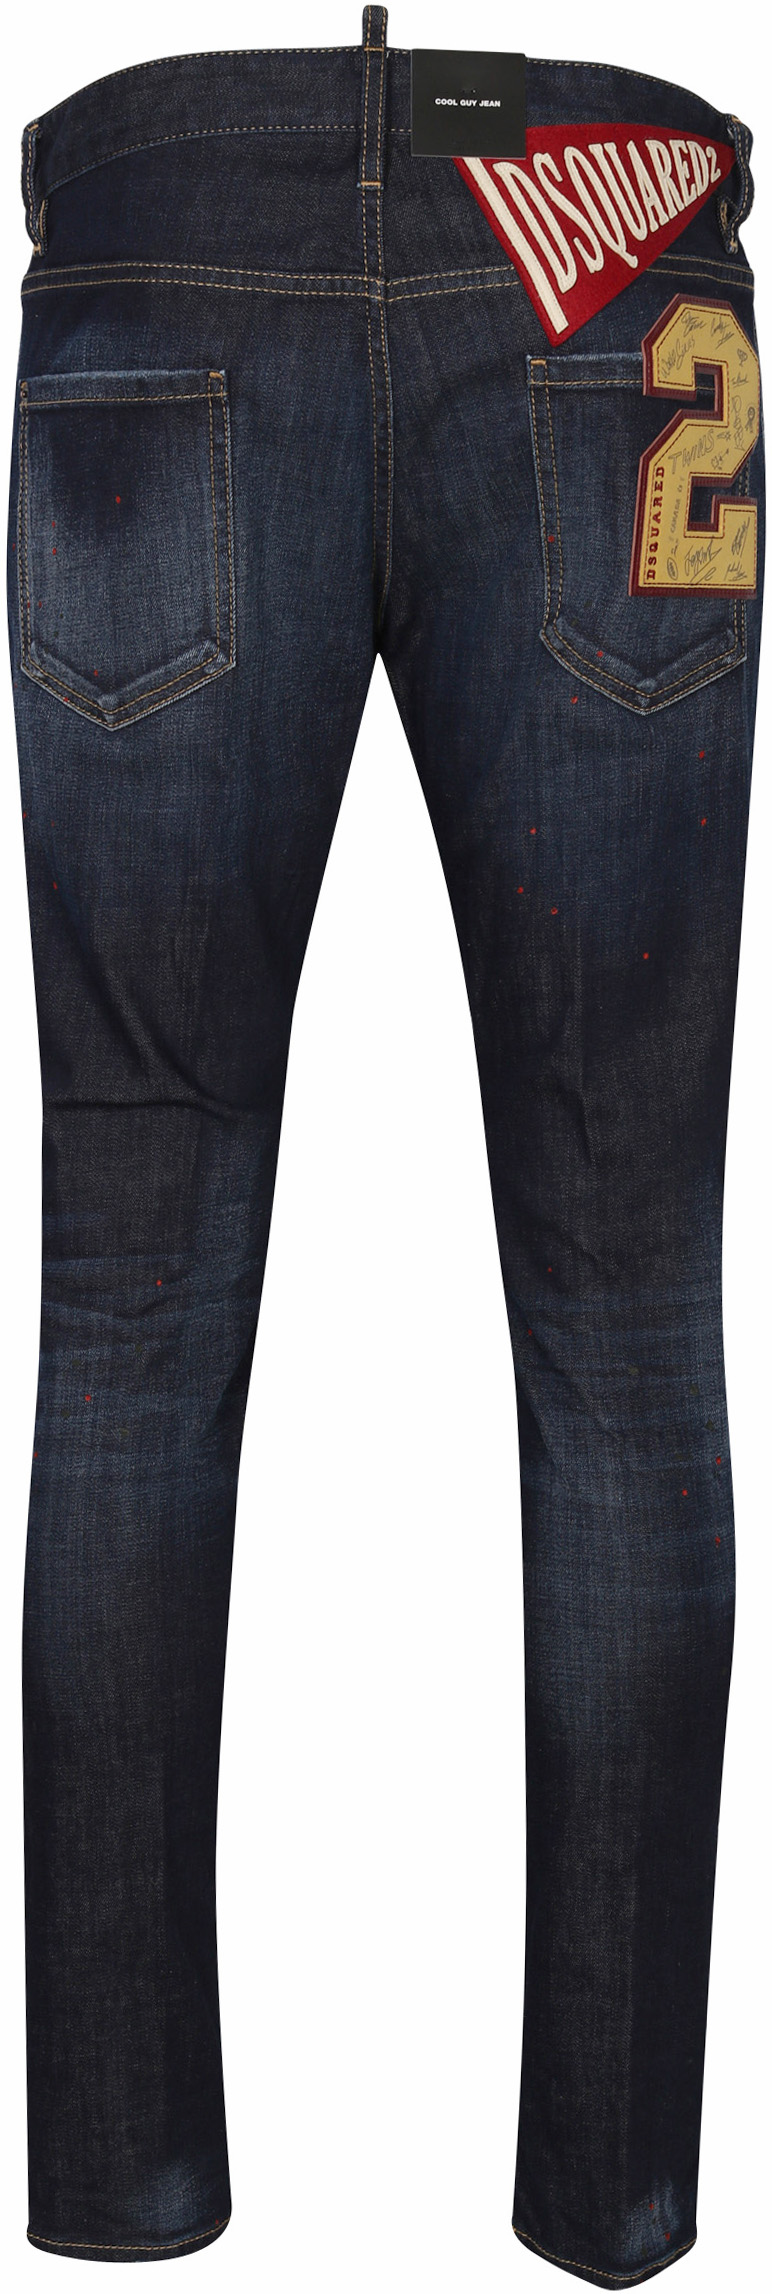 Dsquared Patched Jeans Cool Guy Blue Washed